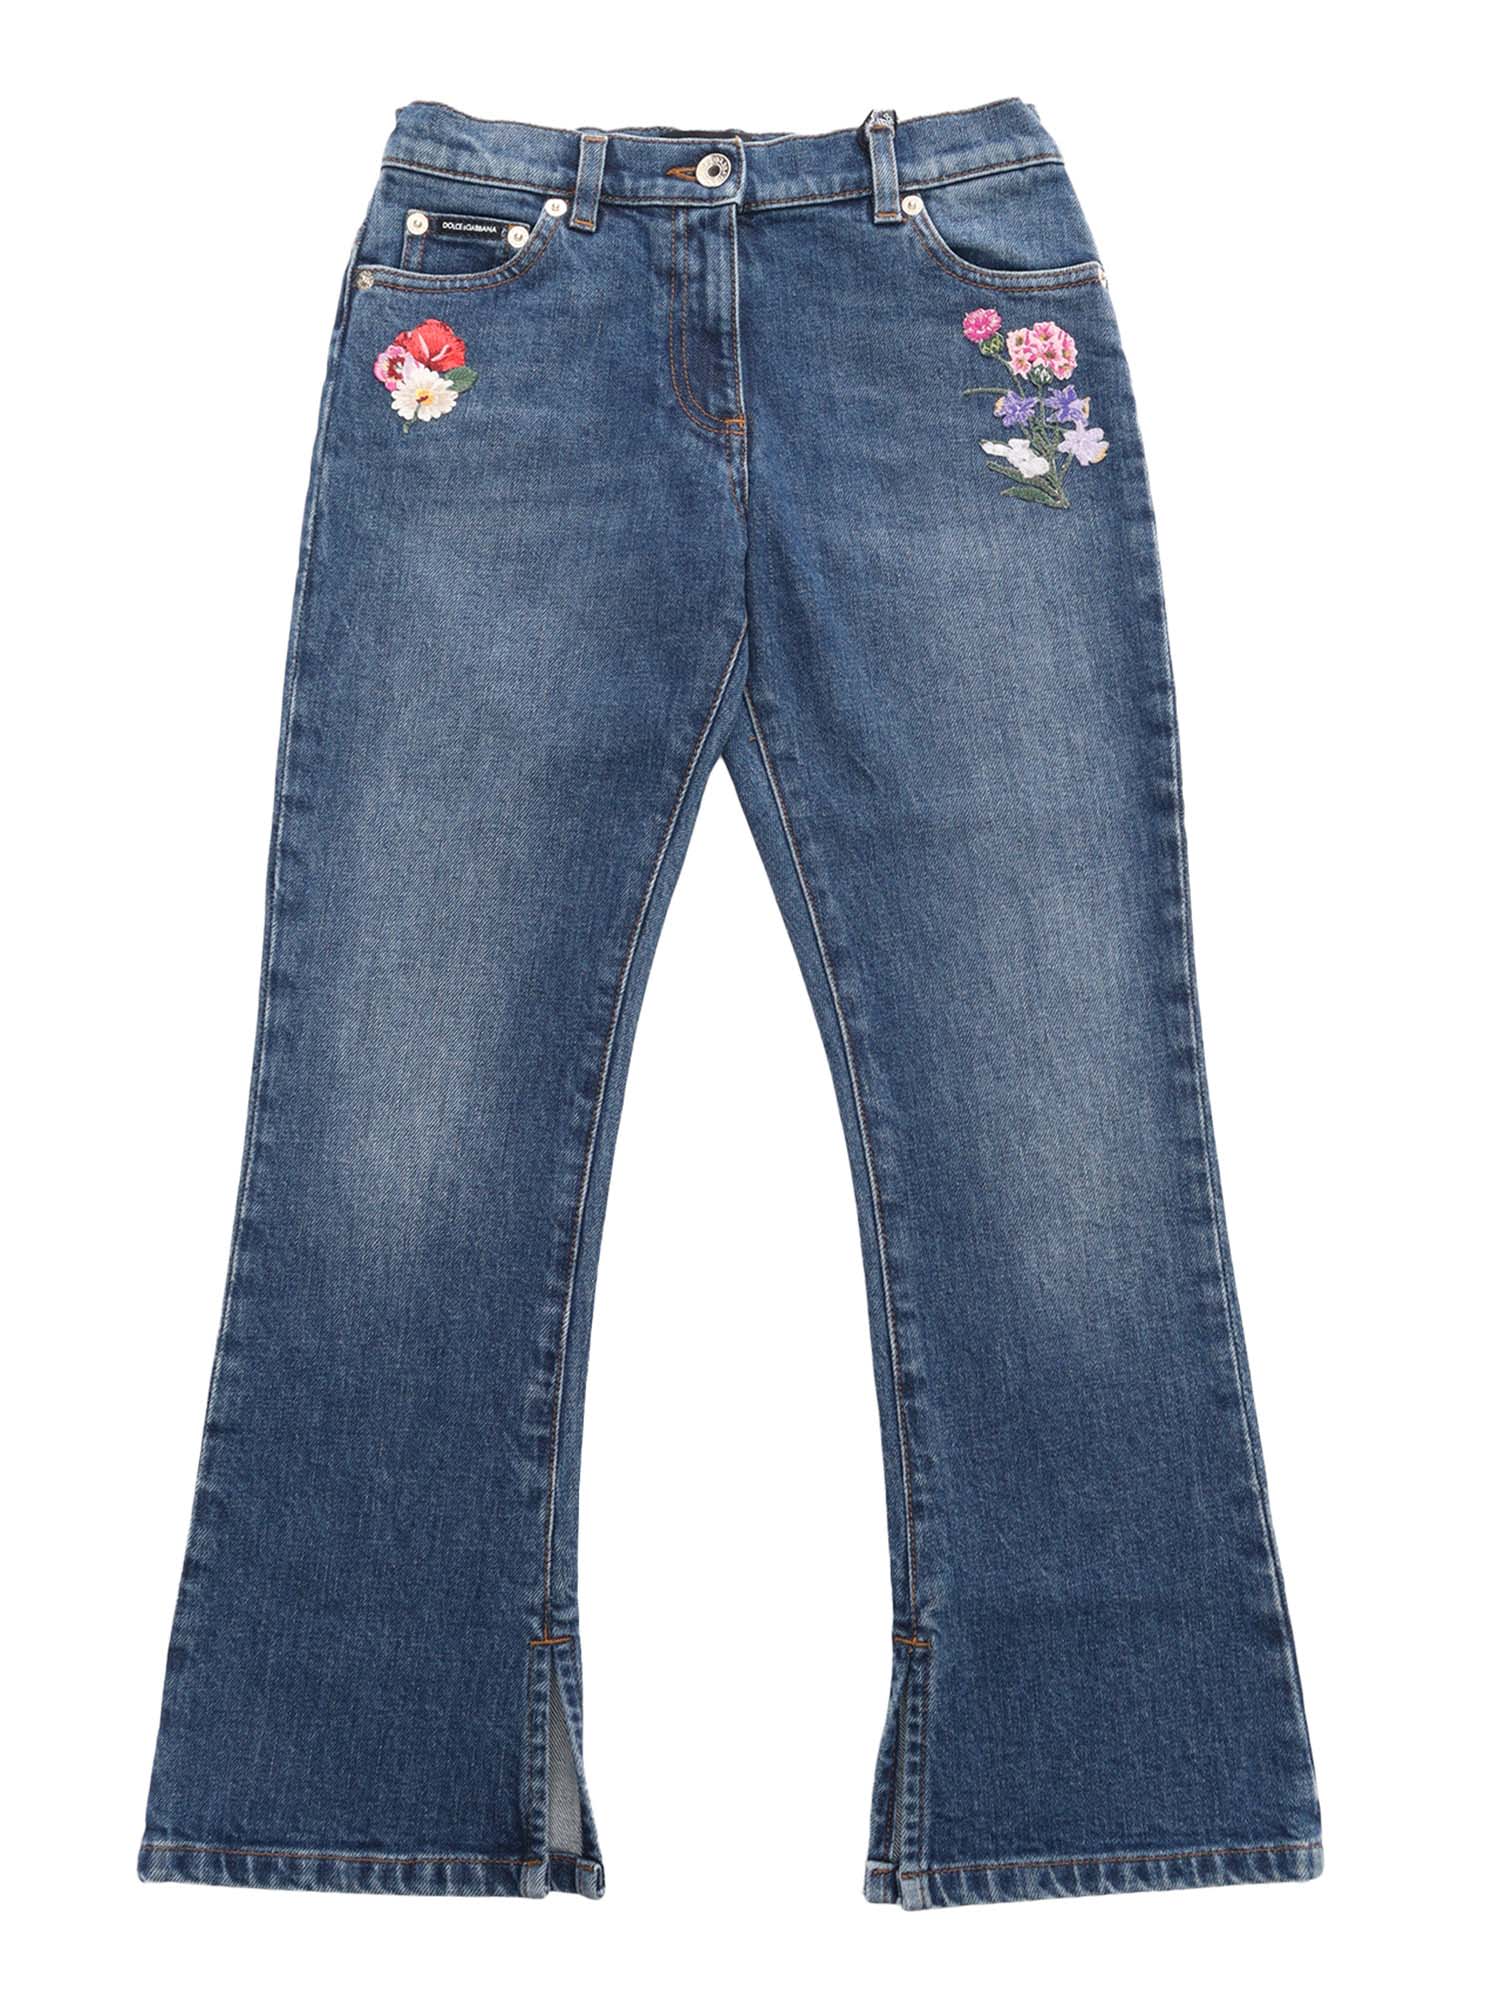 DOLCE & GABBANA EMBROIDERY JEANS